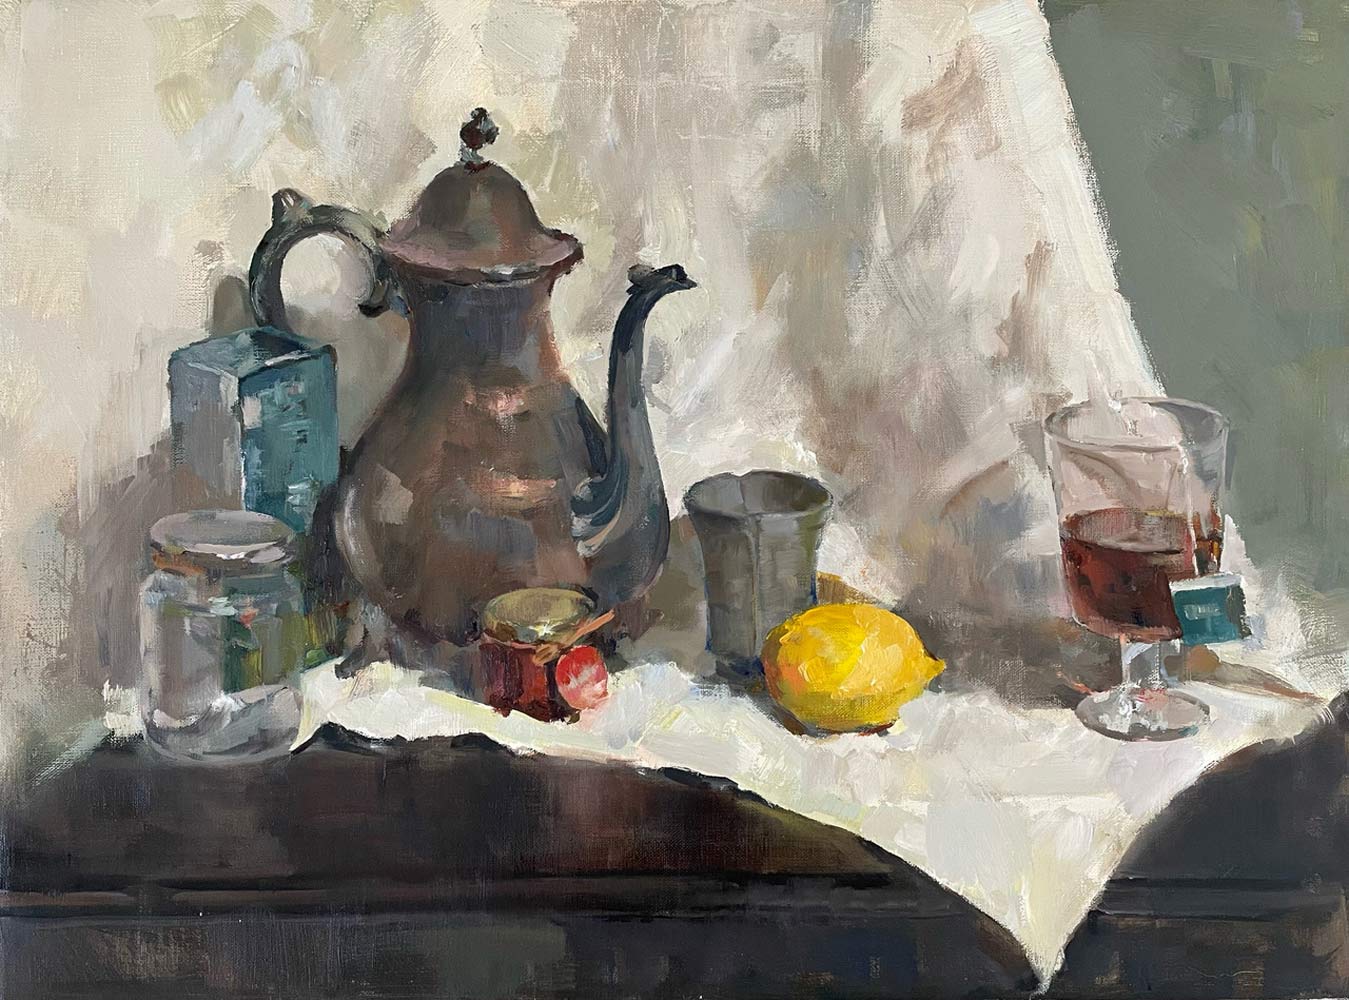 Buy painting online Singapore Exquisite Art Irina Forrester Still life with a lemon